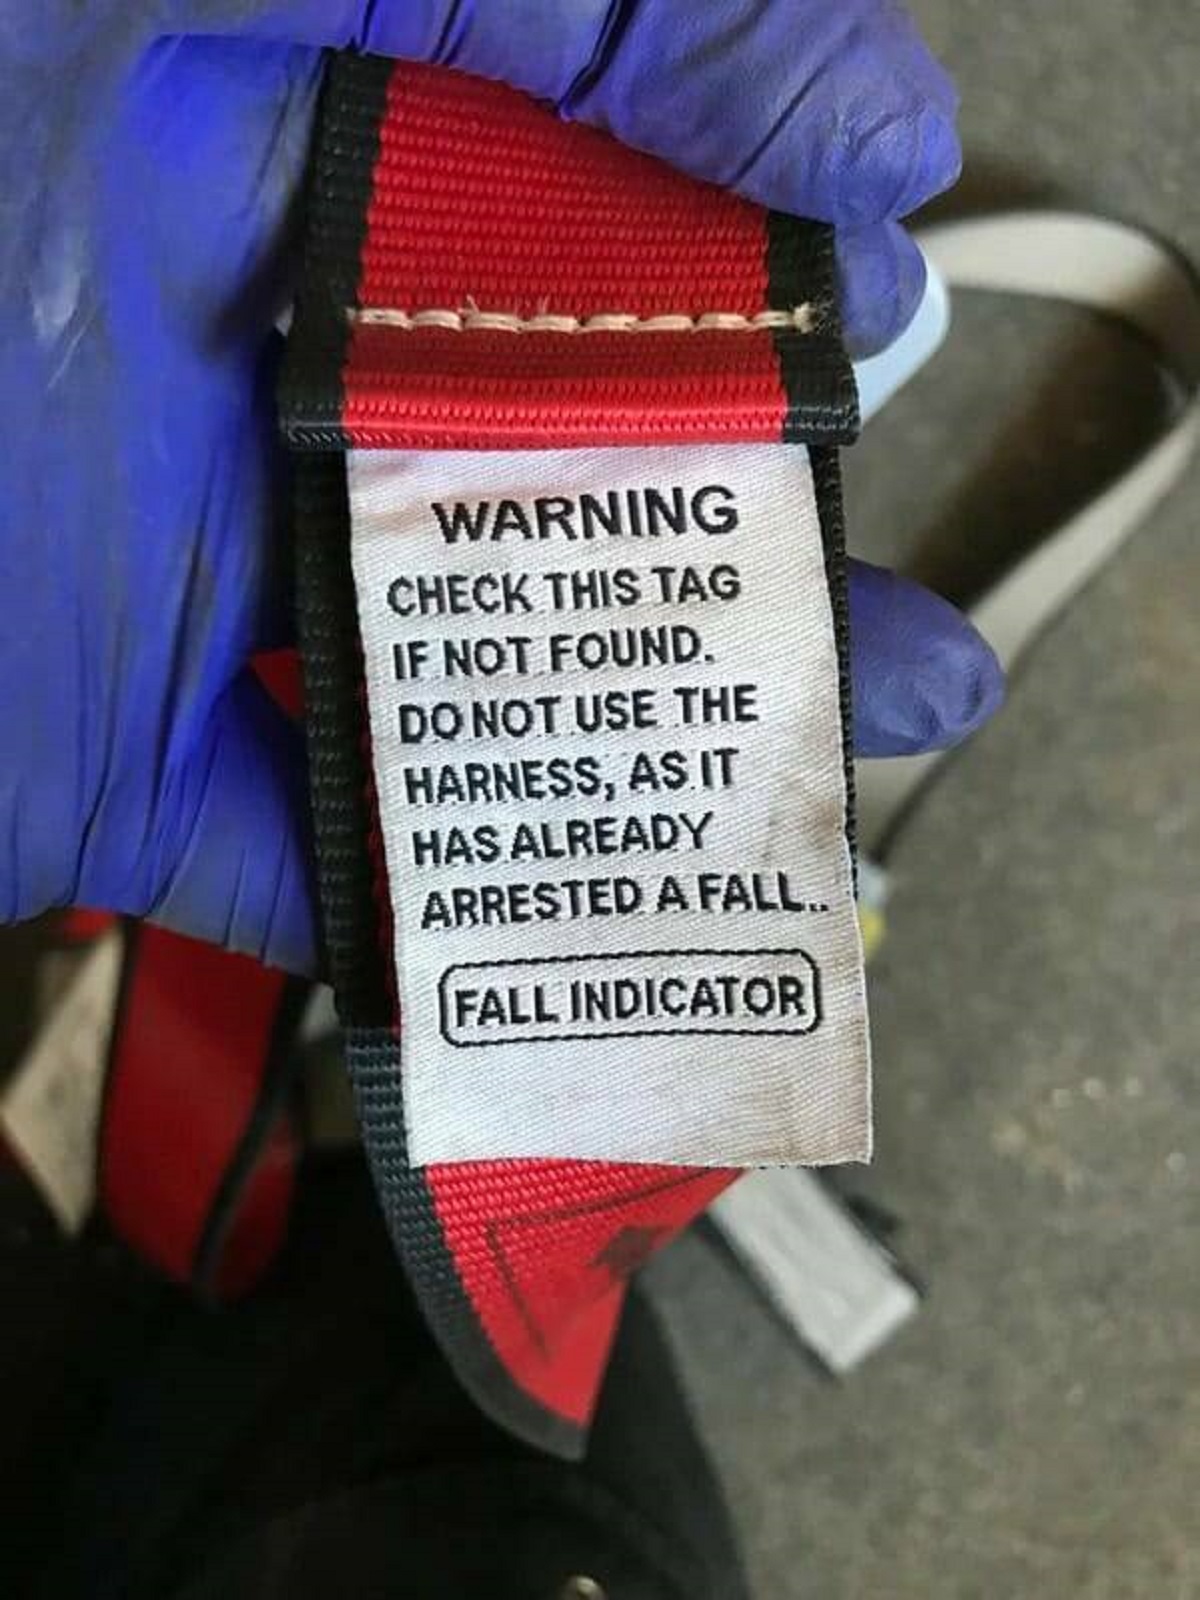 “But if the tag isn’t there… people wouldn’t know not to use it…”